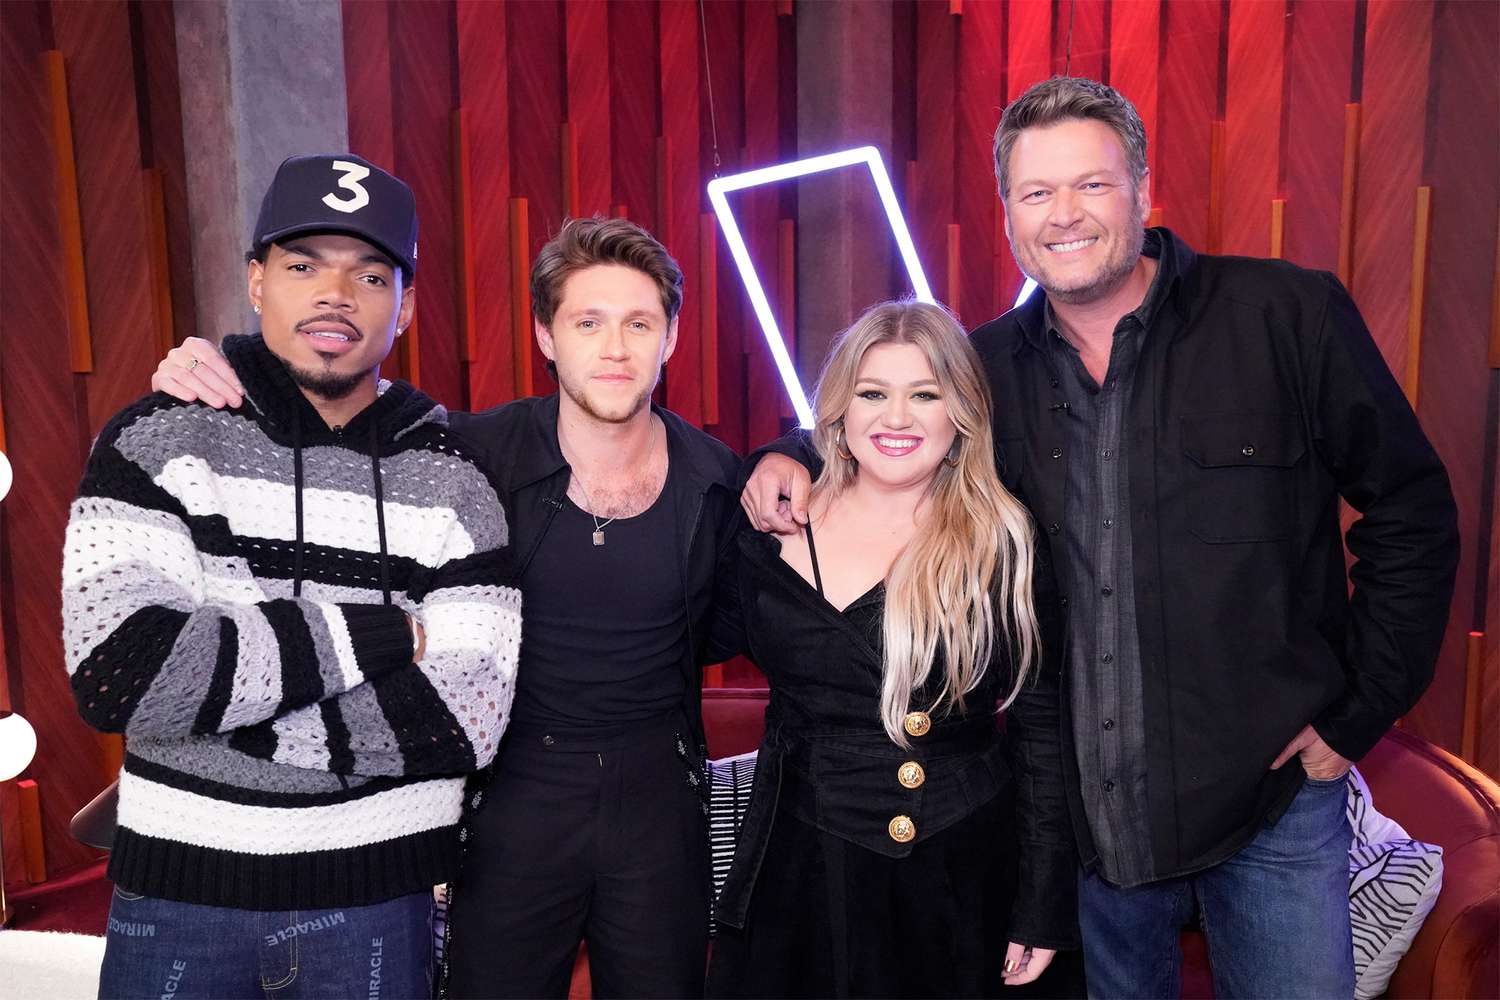 THE VOICE -- "Blind Auditions" Episode -- Pictured: (l-r) Chance the Rapper, Niall Horan, Kelly Clarkson, Blake Shelton